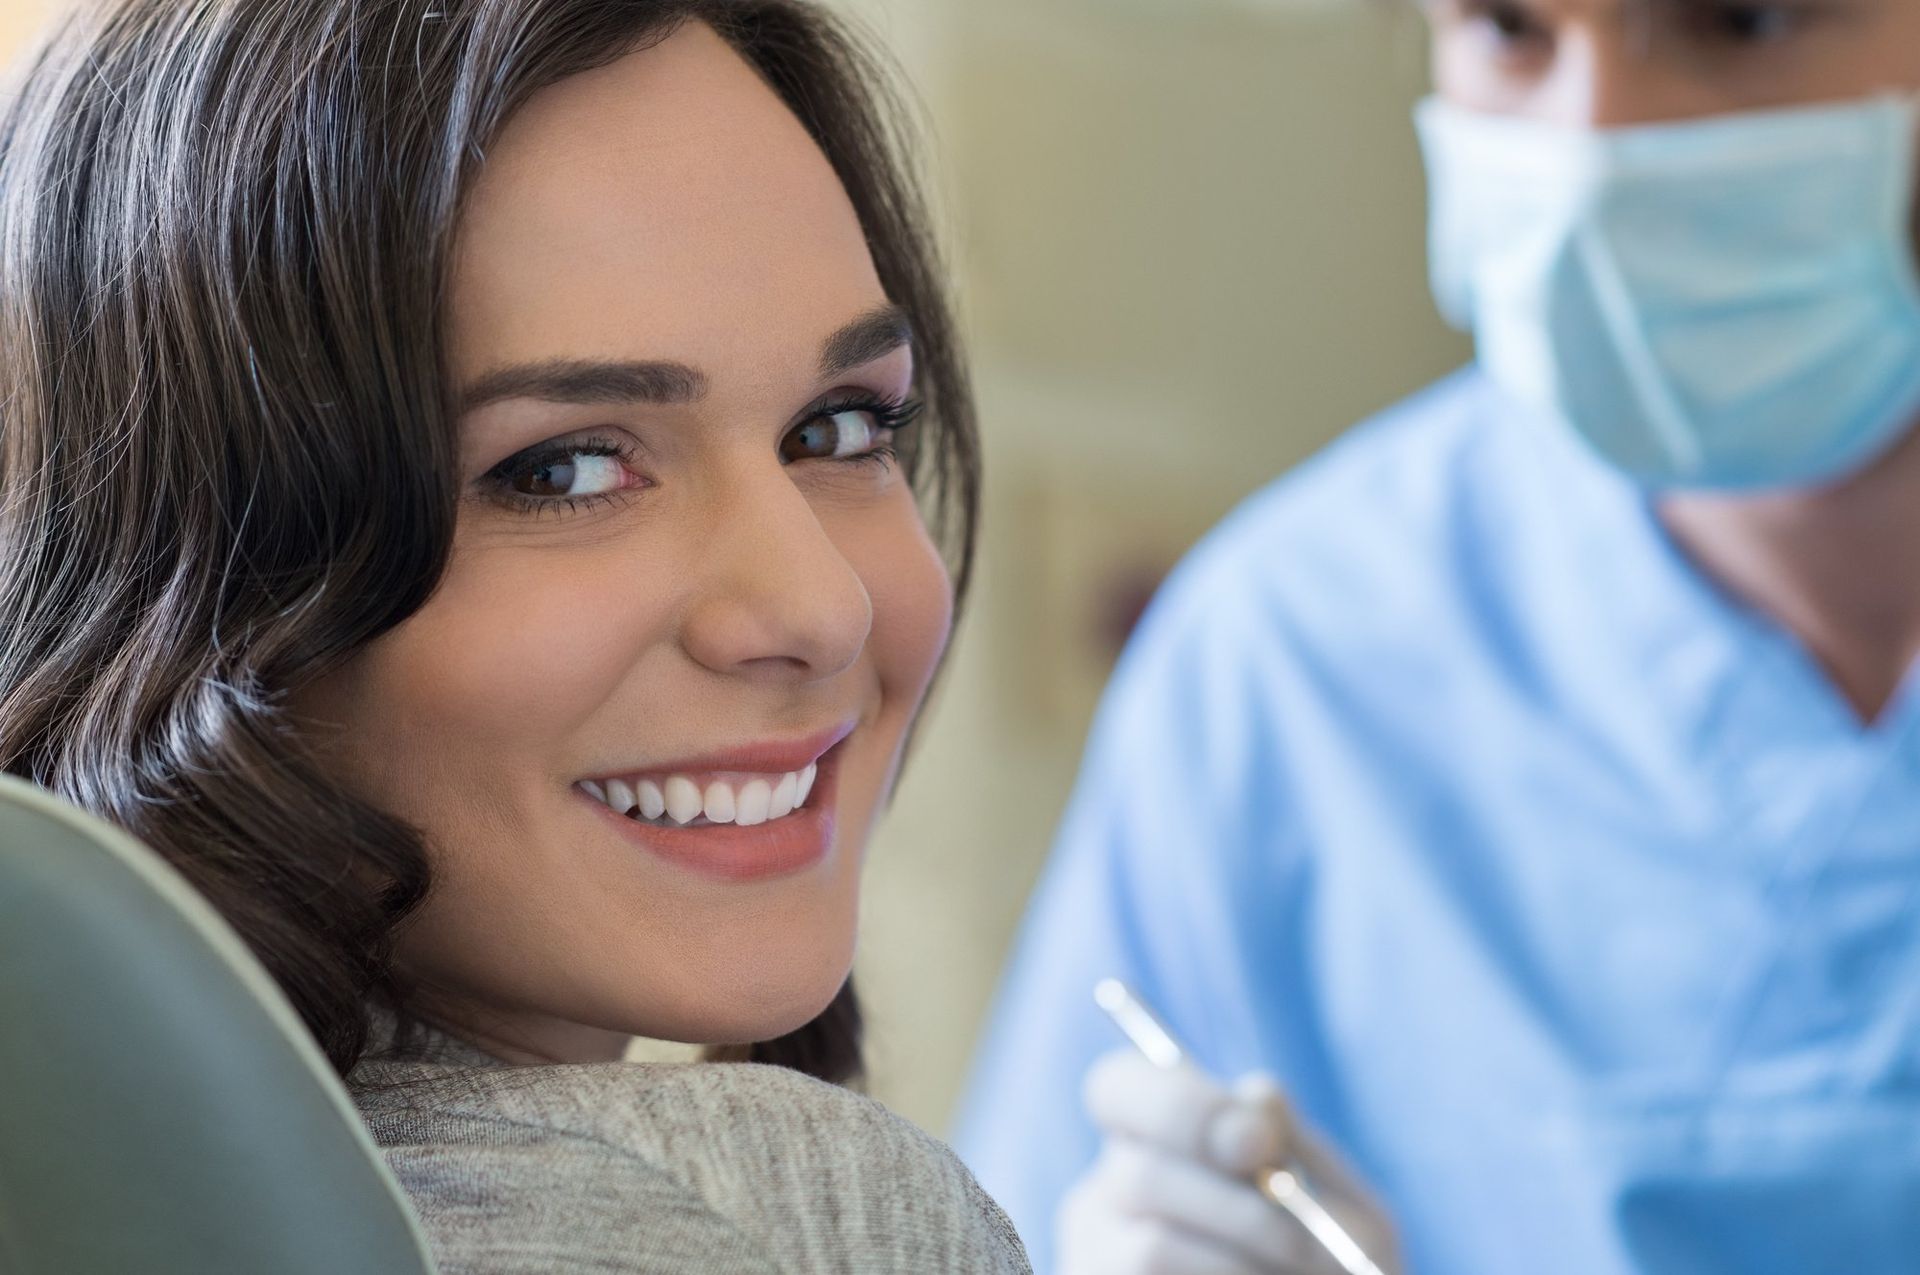 woman at dentist smiling happily